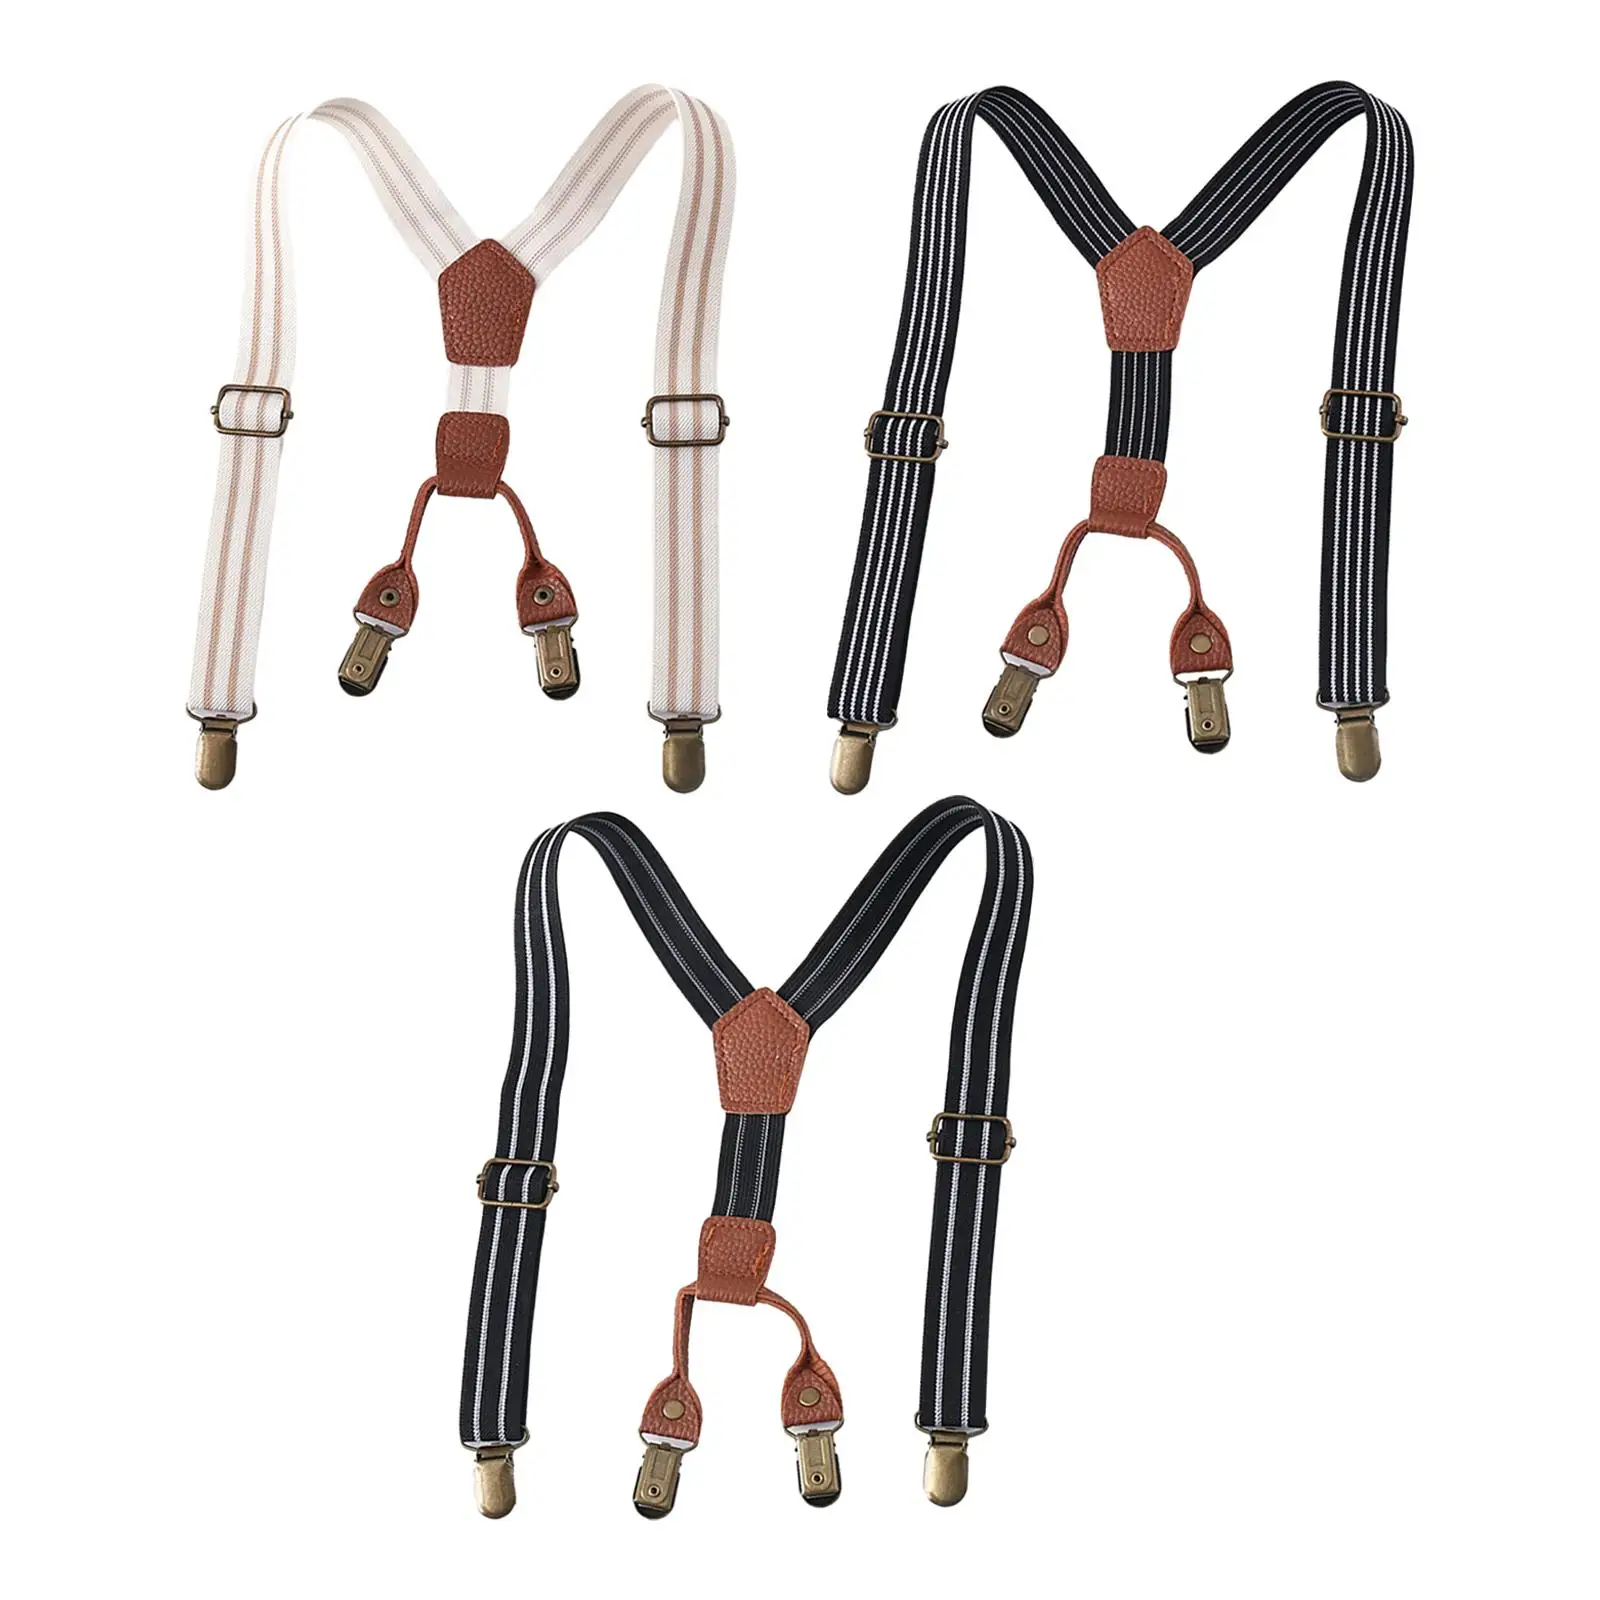 Kids Suspenders Y Shape Brace Clothes Accessories Elastic Straps Tuxedo Suspenders Pants Suspender for Birthday Outfit